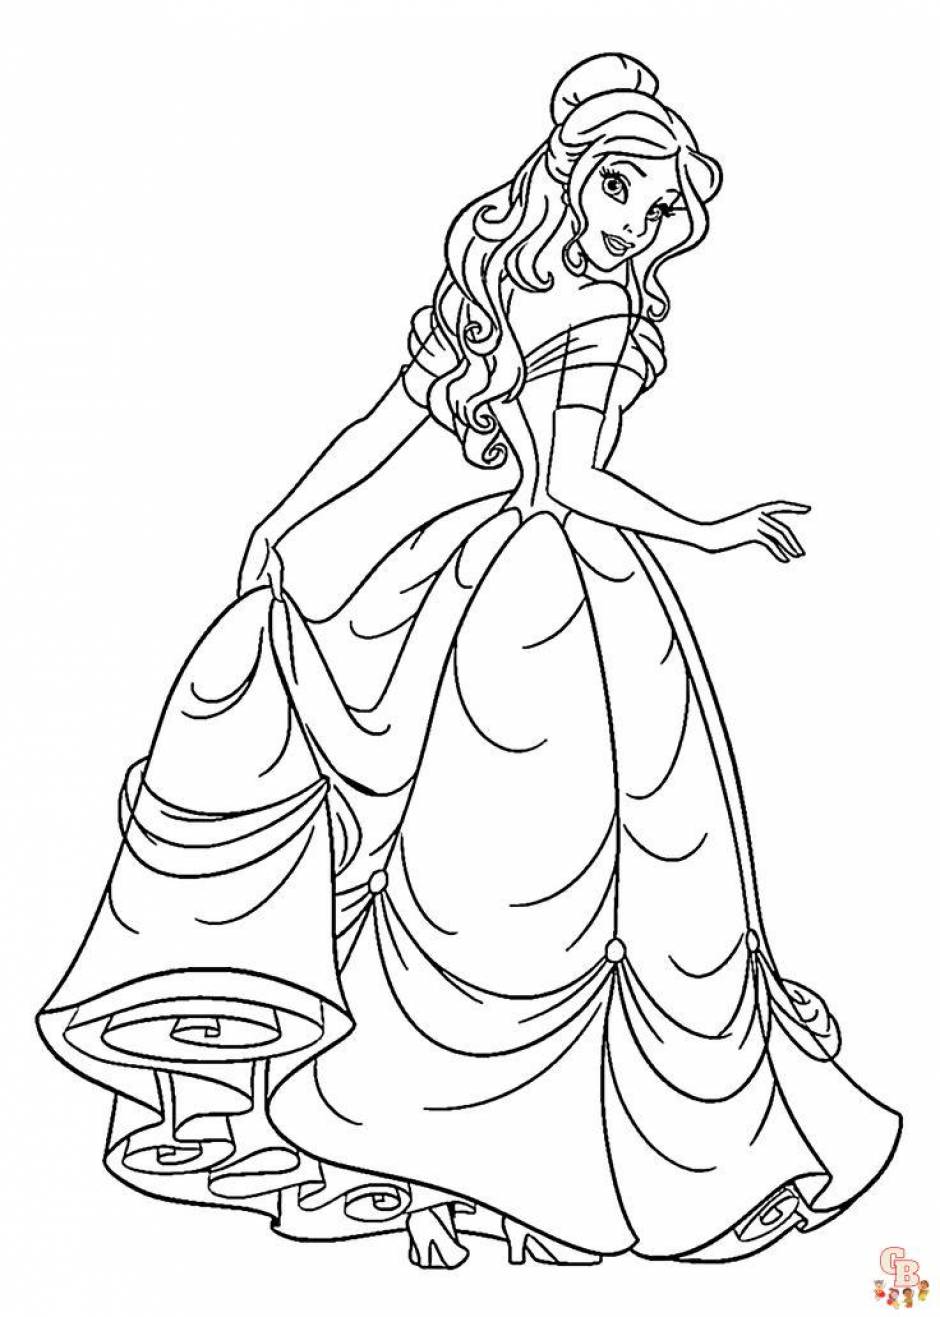 unleash-your-creativity-with-princess-coloring-pages